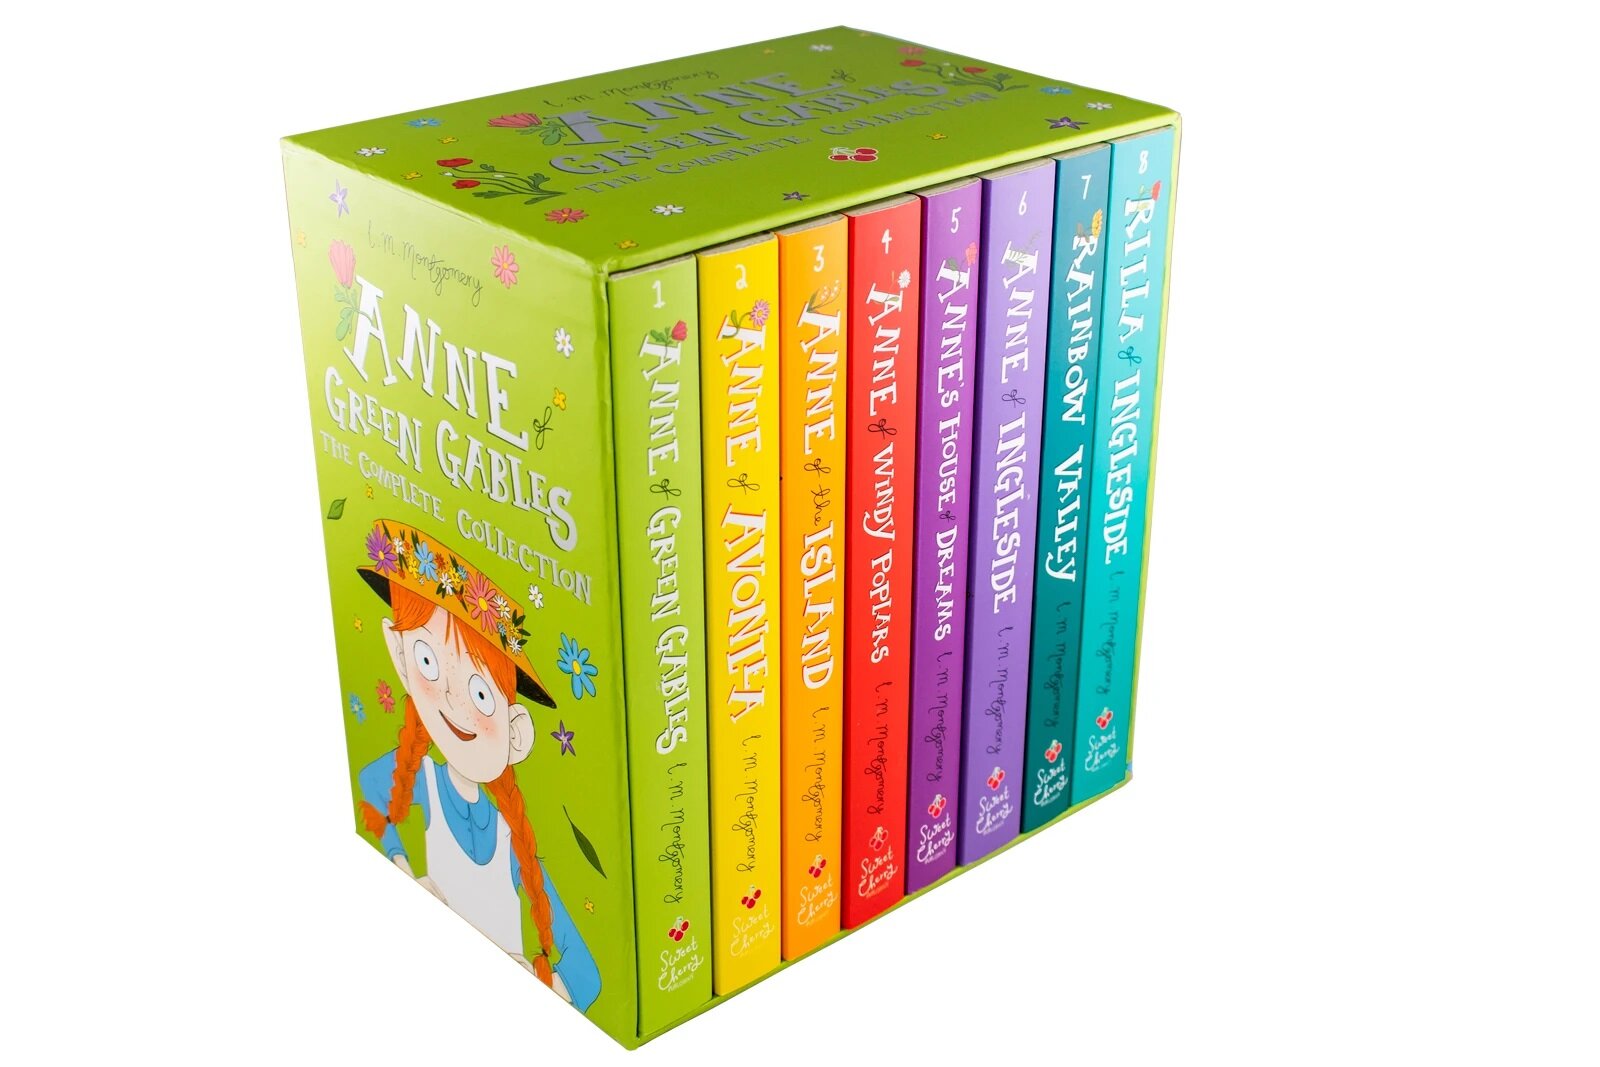 Anne of Green Gables: The Complete Collection (Boxed pack)